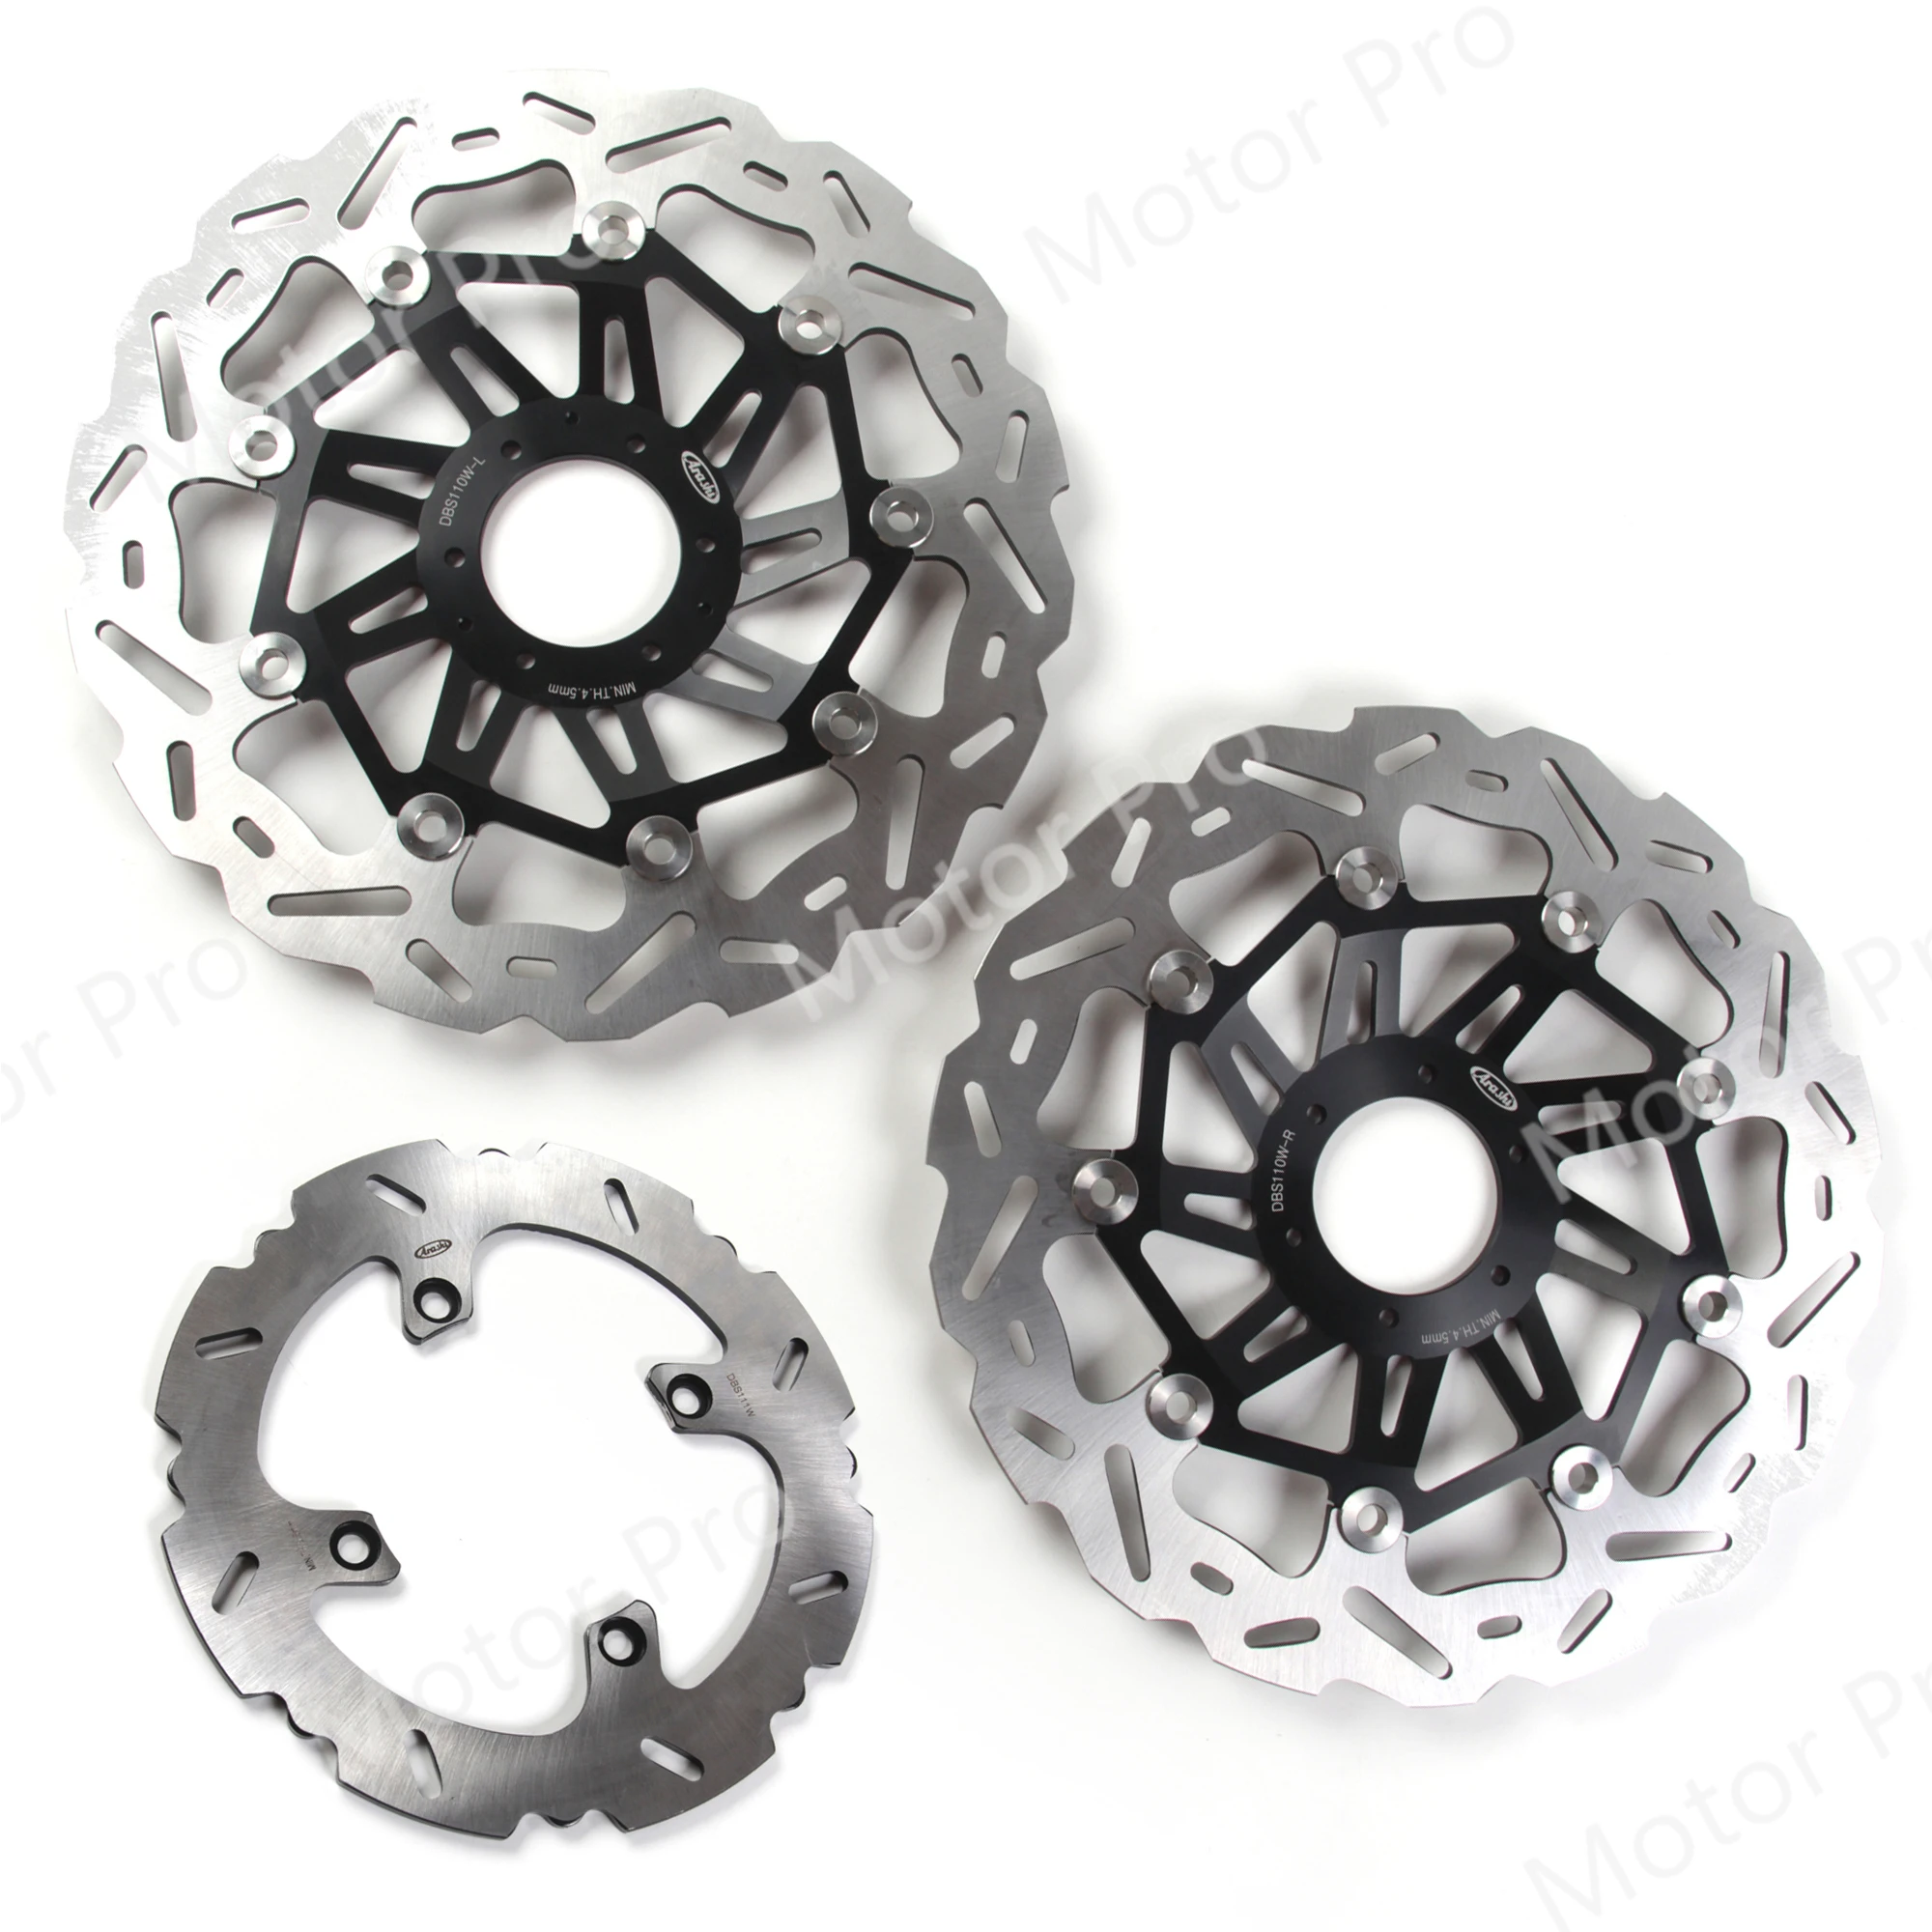 

3PCS Floating CNC Front Brake Discs Rotors Disk for Honda CRF L AFRICA TWIN ADV ABS 1000 2018 2019 / CRF1000L